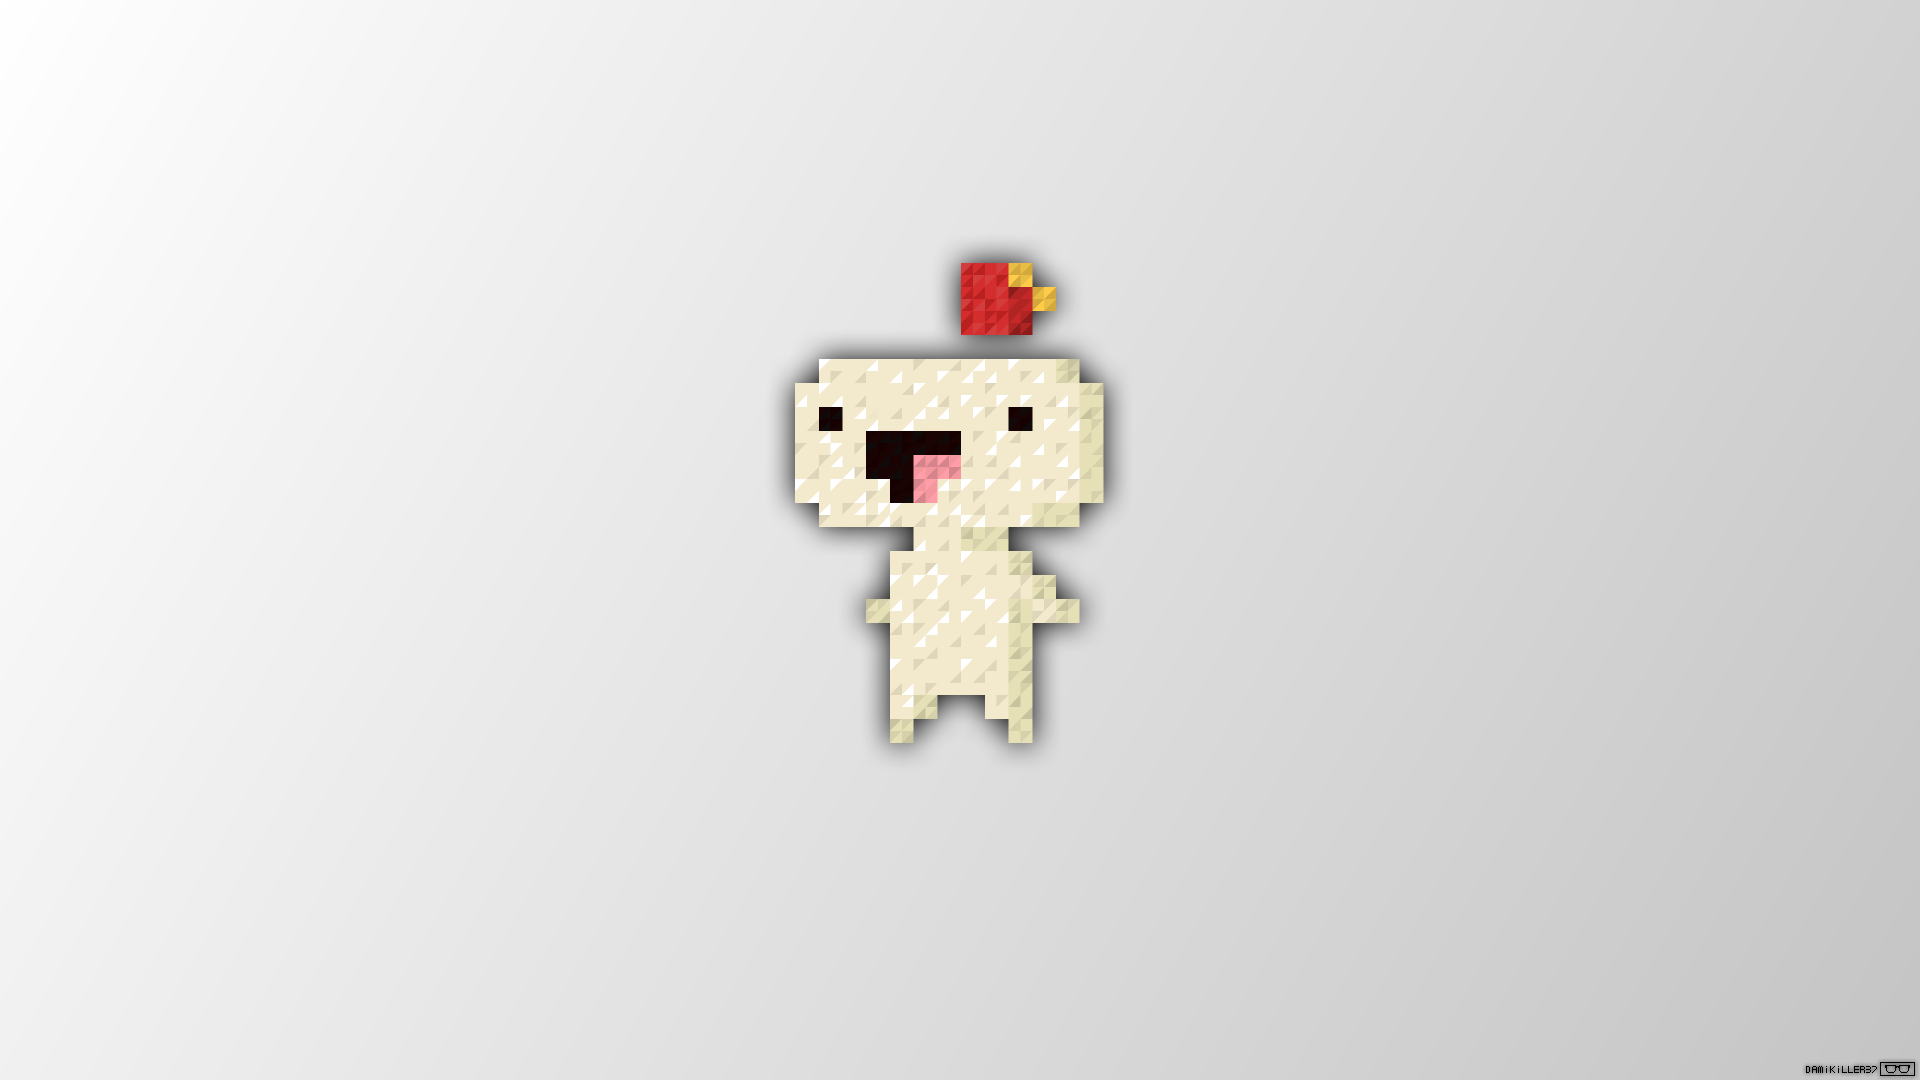 General 1920x1080 Fez  Gomez pixel art Trixel video game art minimalism simple background white background video games PC gaming pixels pixelated